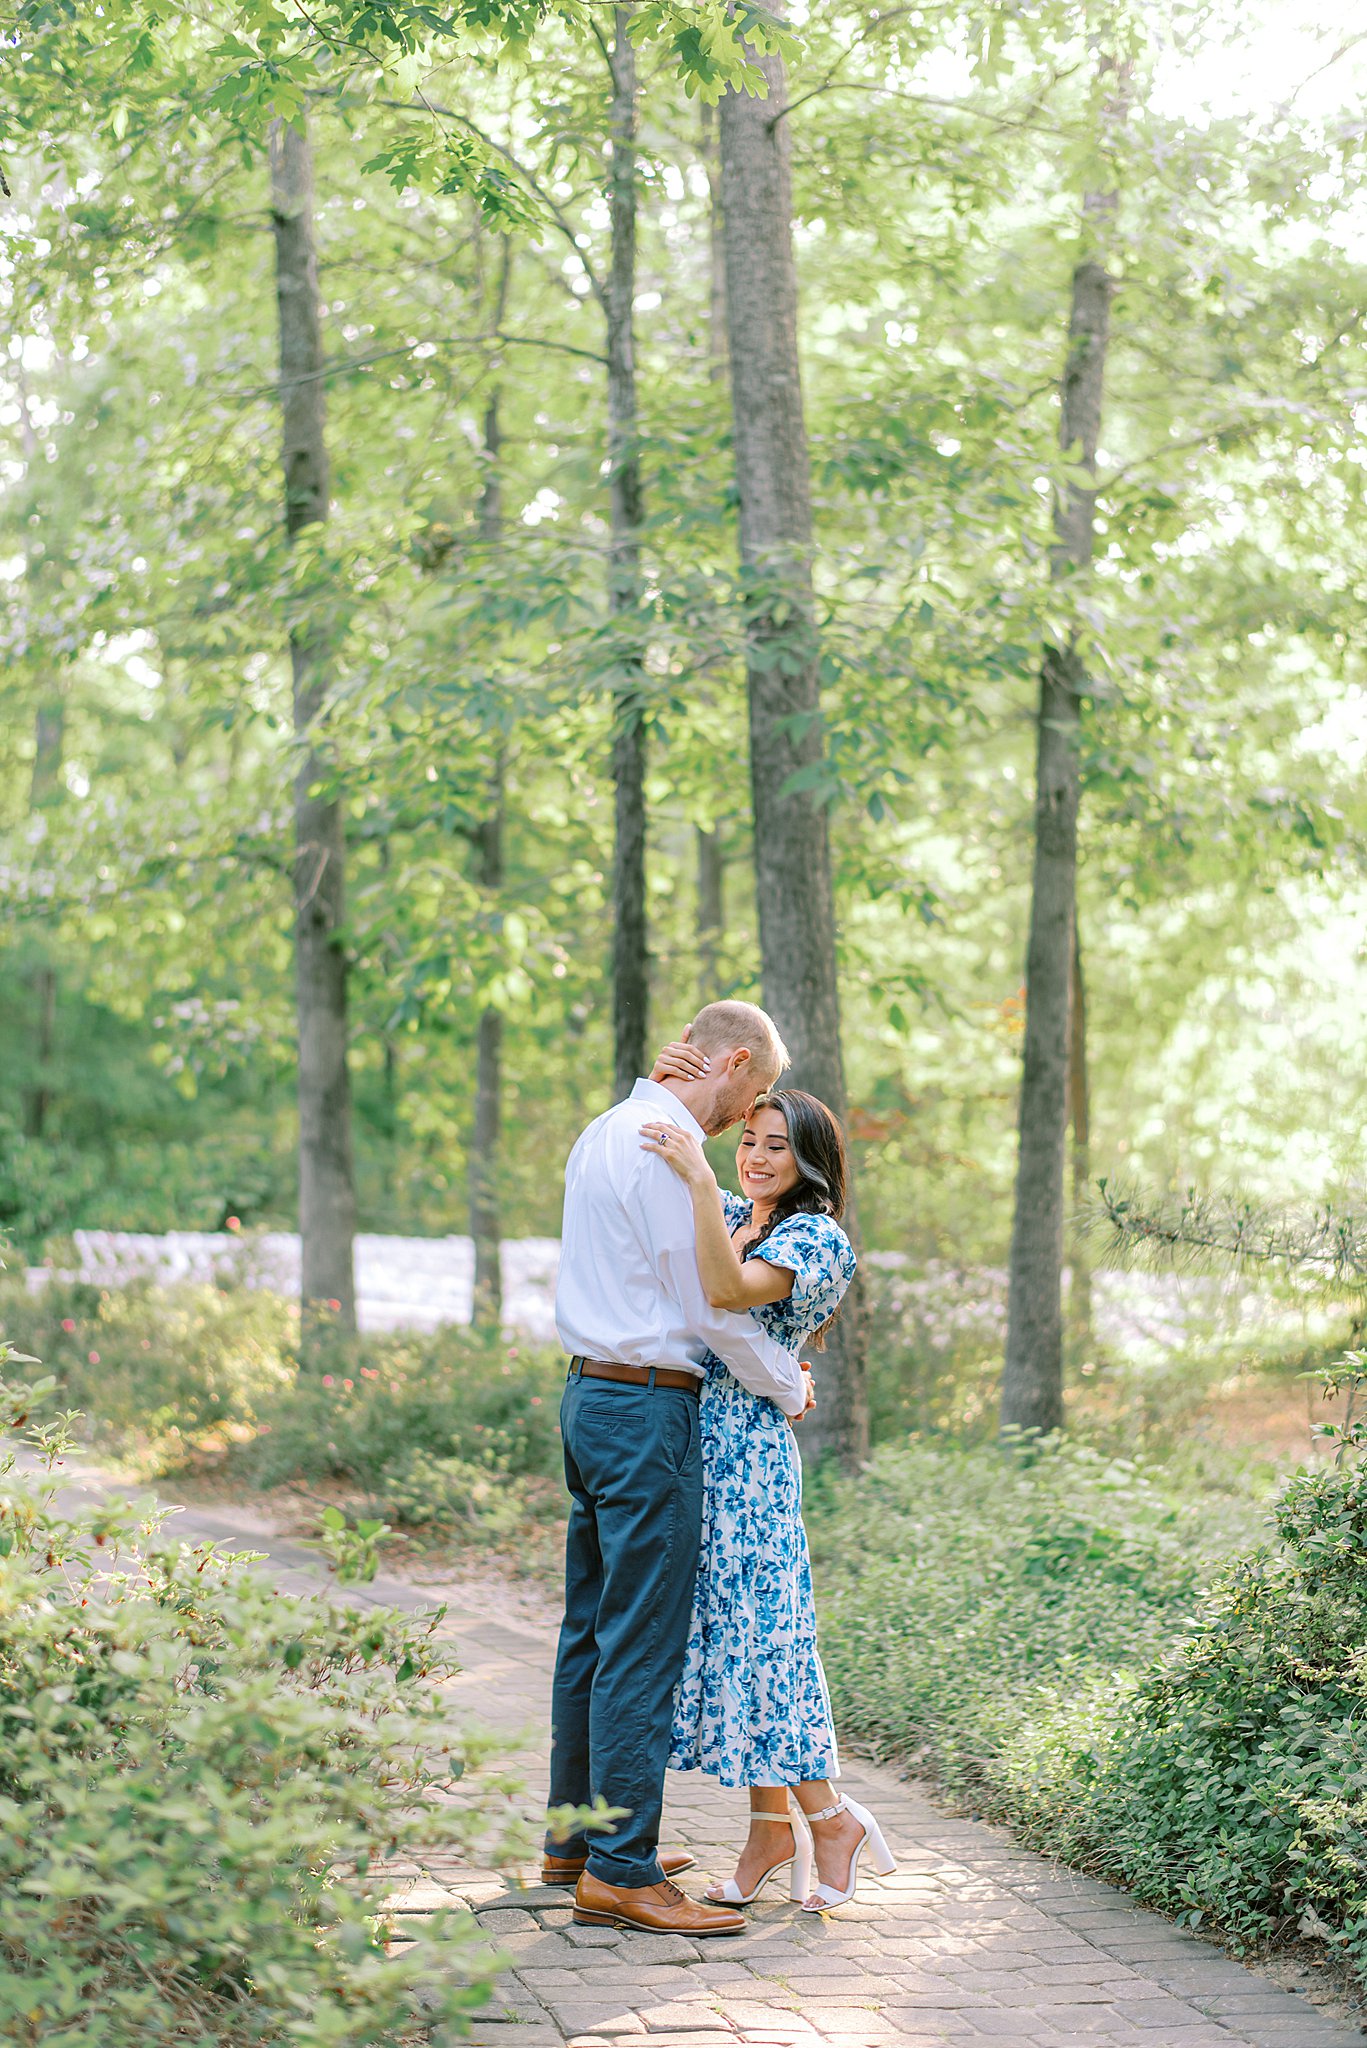 Newlyweds stand in a stone path through a garden hugging under trees Morning Glory Farm